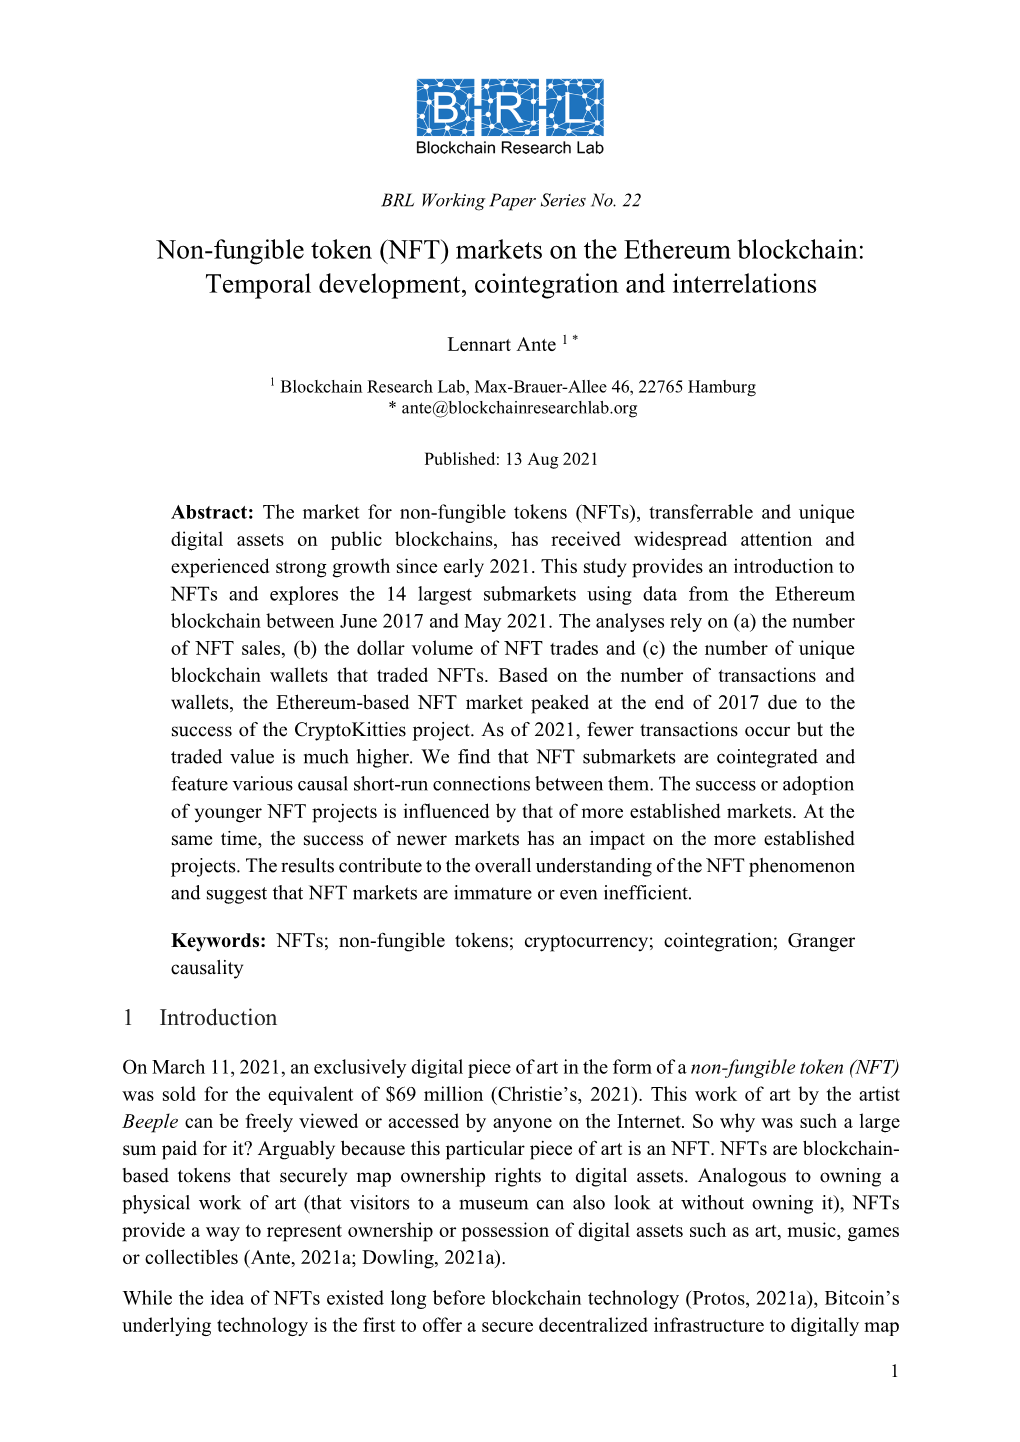 Non-Fungible Token (NFT) Markets on the Ethereum Blockchain: Temporal Development, Cointegration and Interrelations